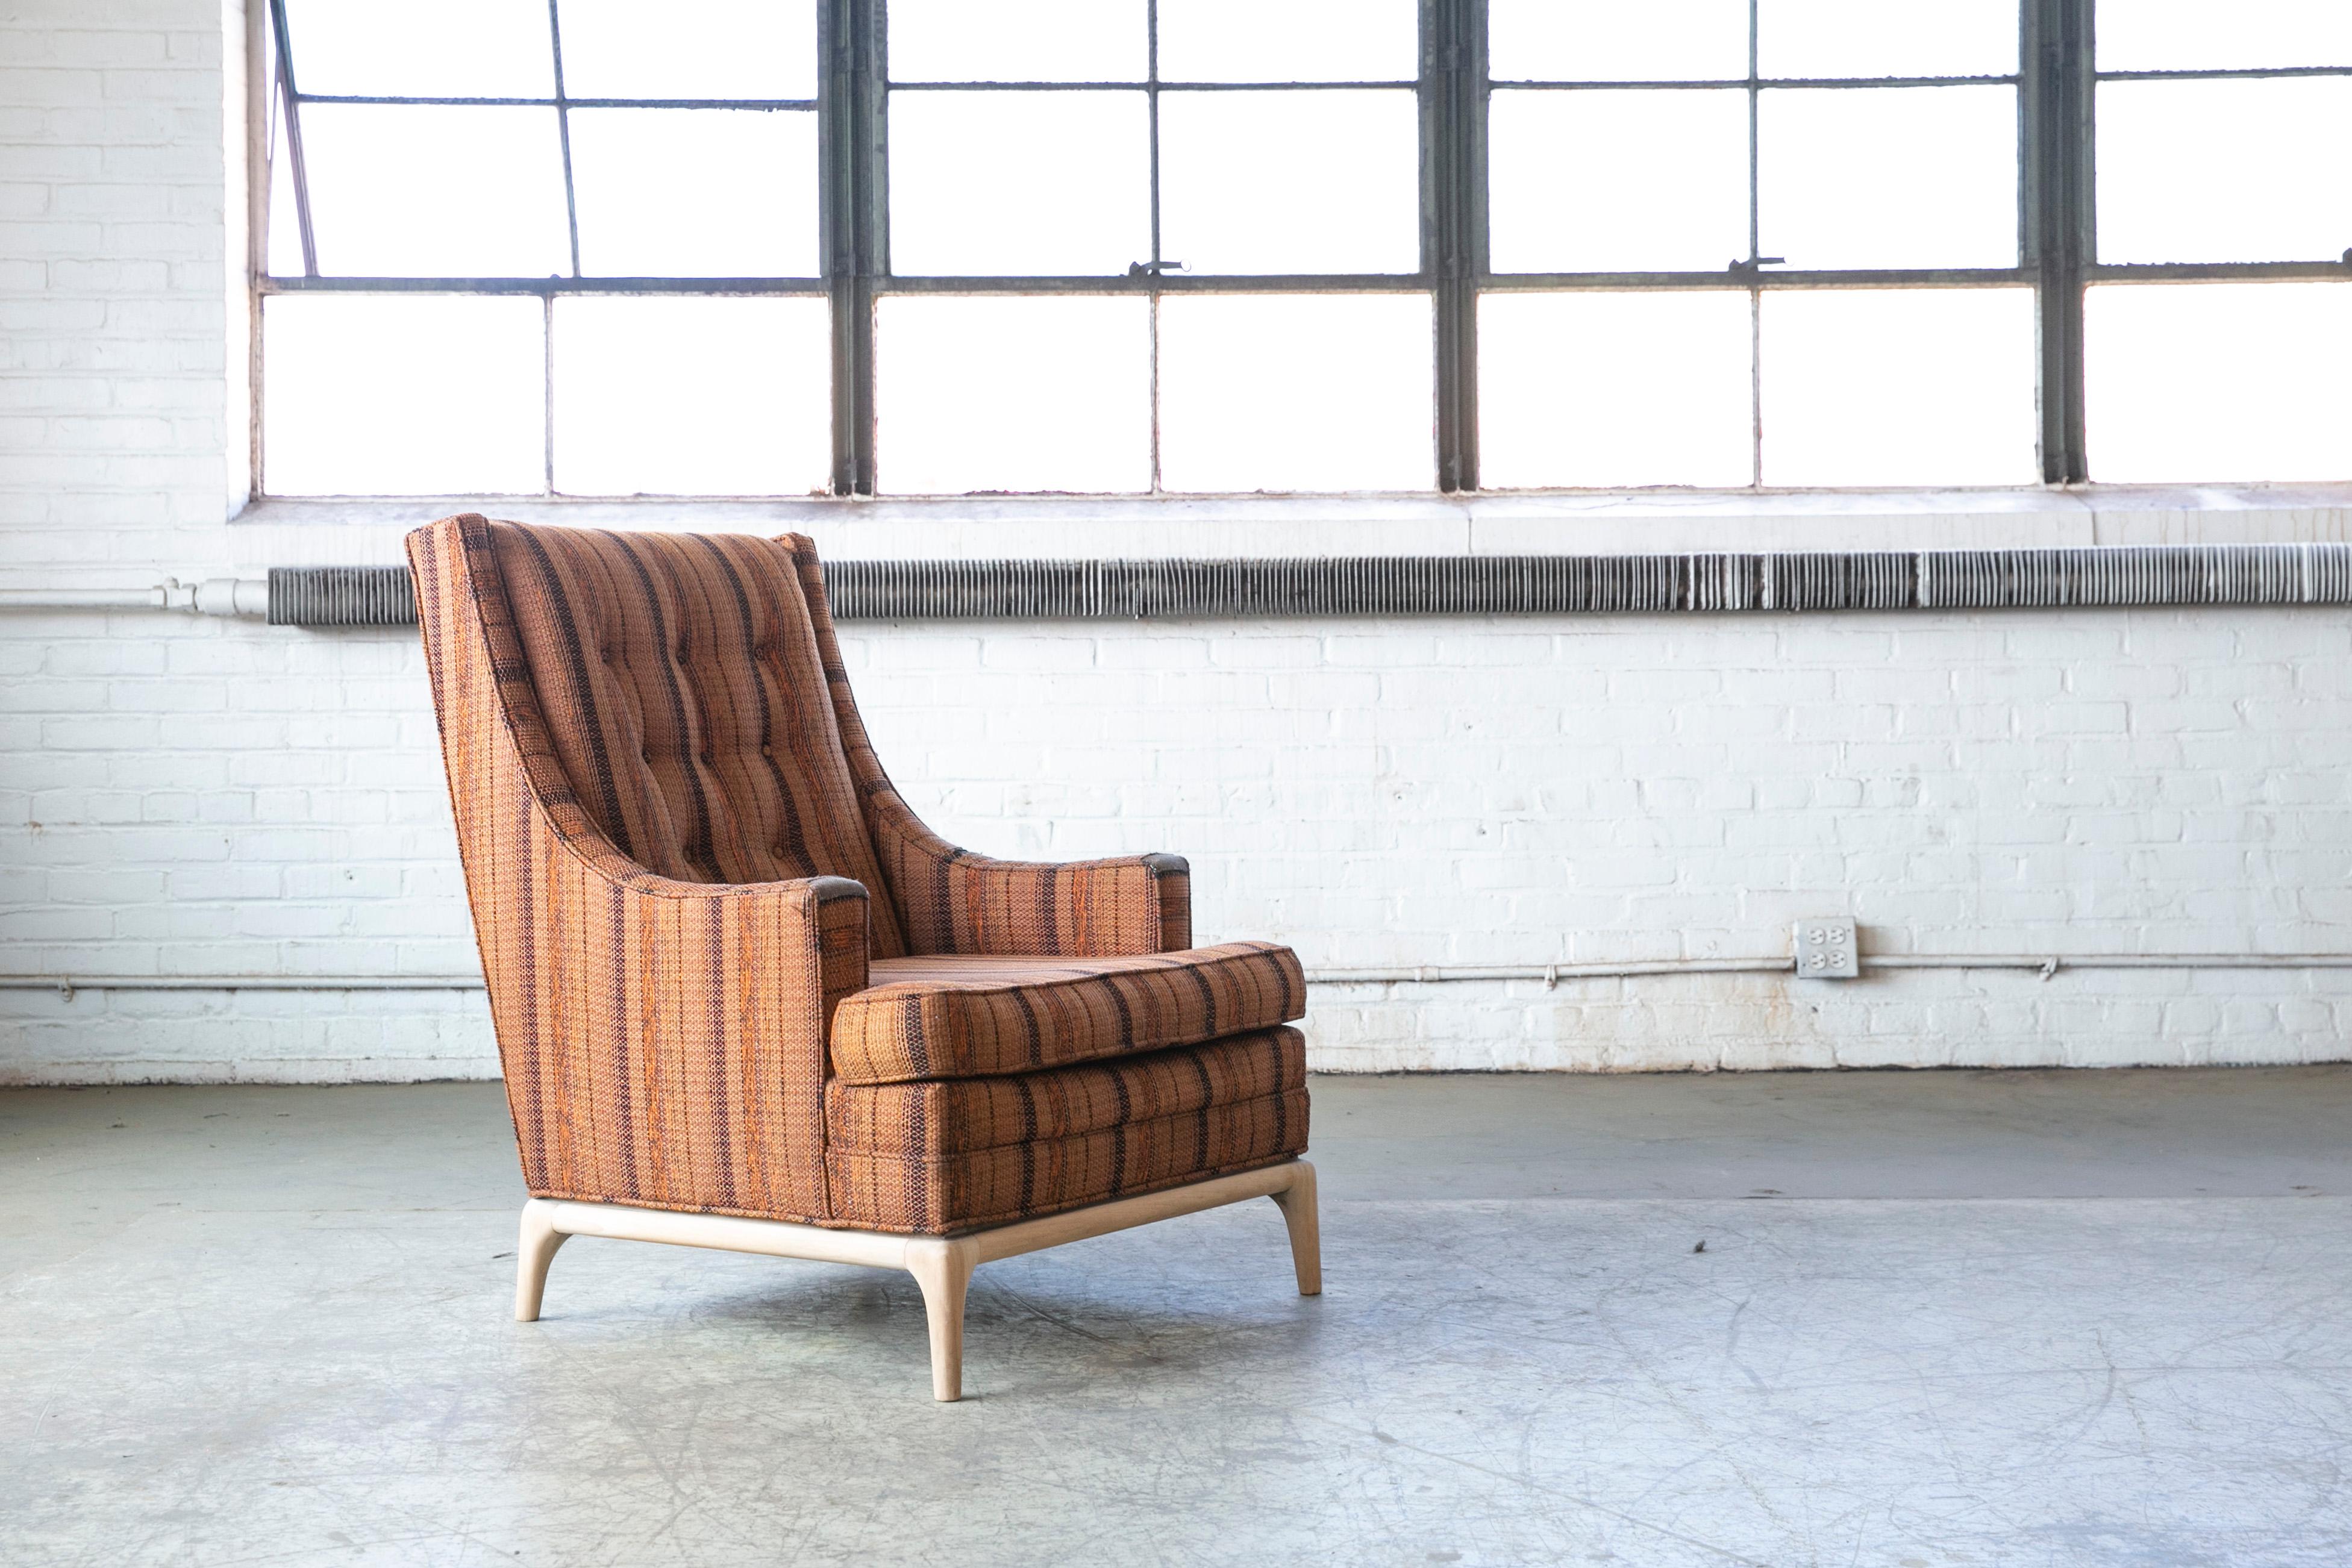 Elegant American 1950's lounge chair with mahogany base in the manner of T.H. Robsjohn- Gibbings. Beautifully made but we are unaware of the maker and Designer. We have sanded the mahogany base to a neutral and more modern finish. We love the